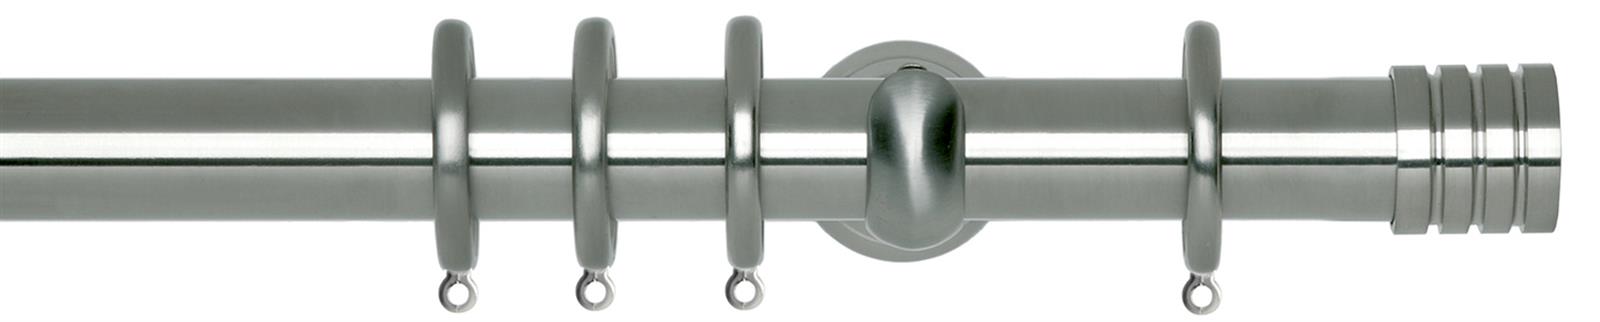 Neo 28mm Pole Stainless Steel Cup Stud